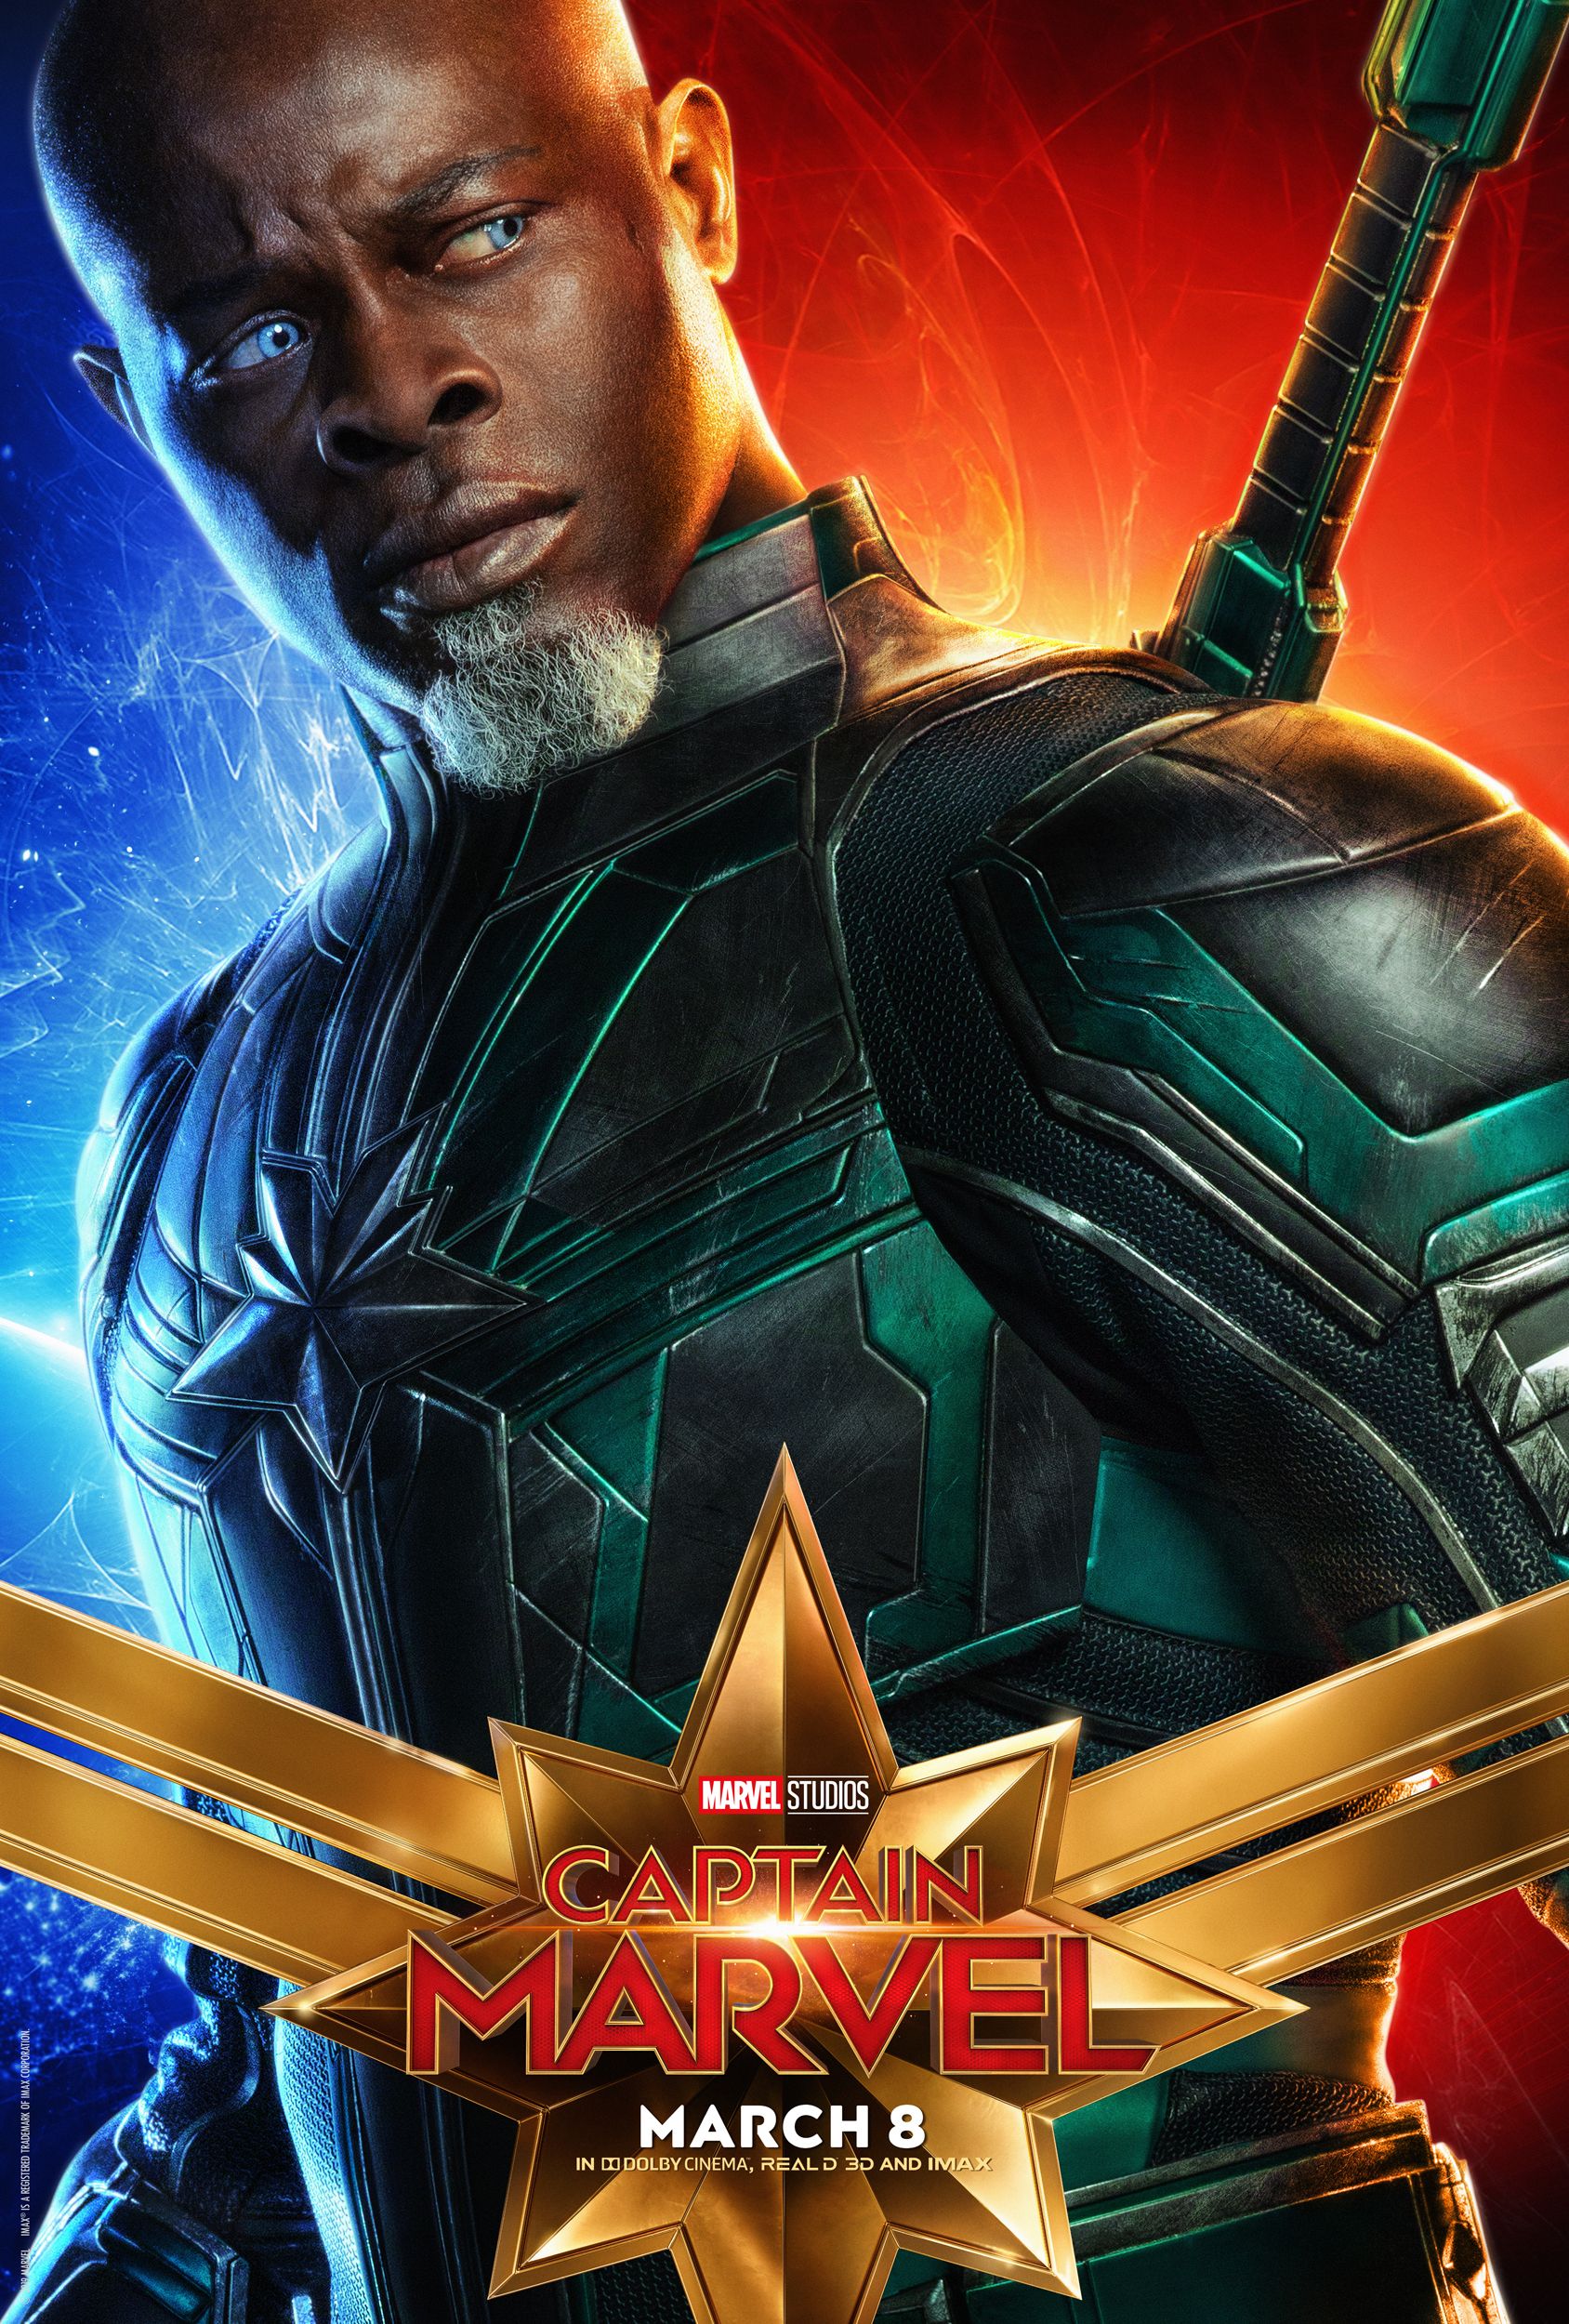 Captain Marvel Character Posters Reveal Brie Larson, Goose, and More | Collider